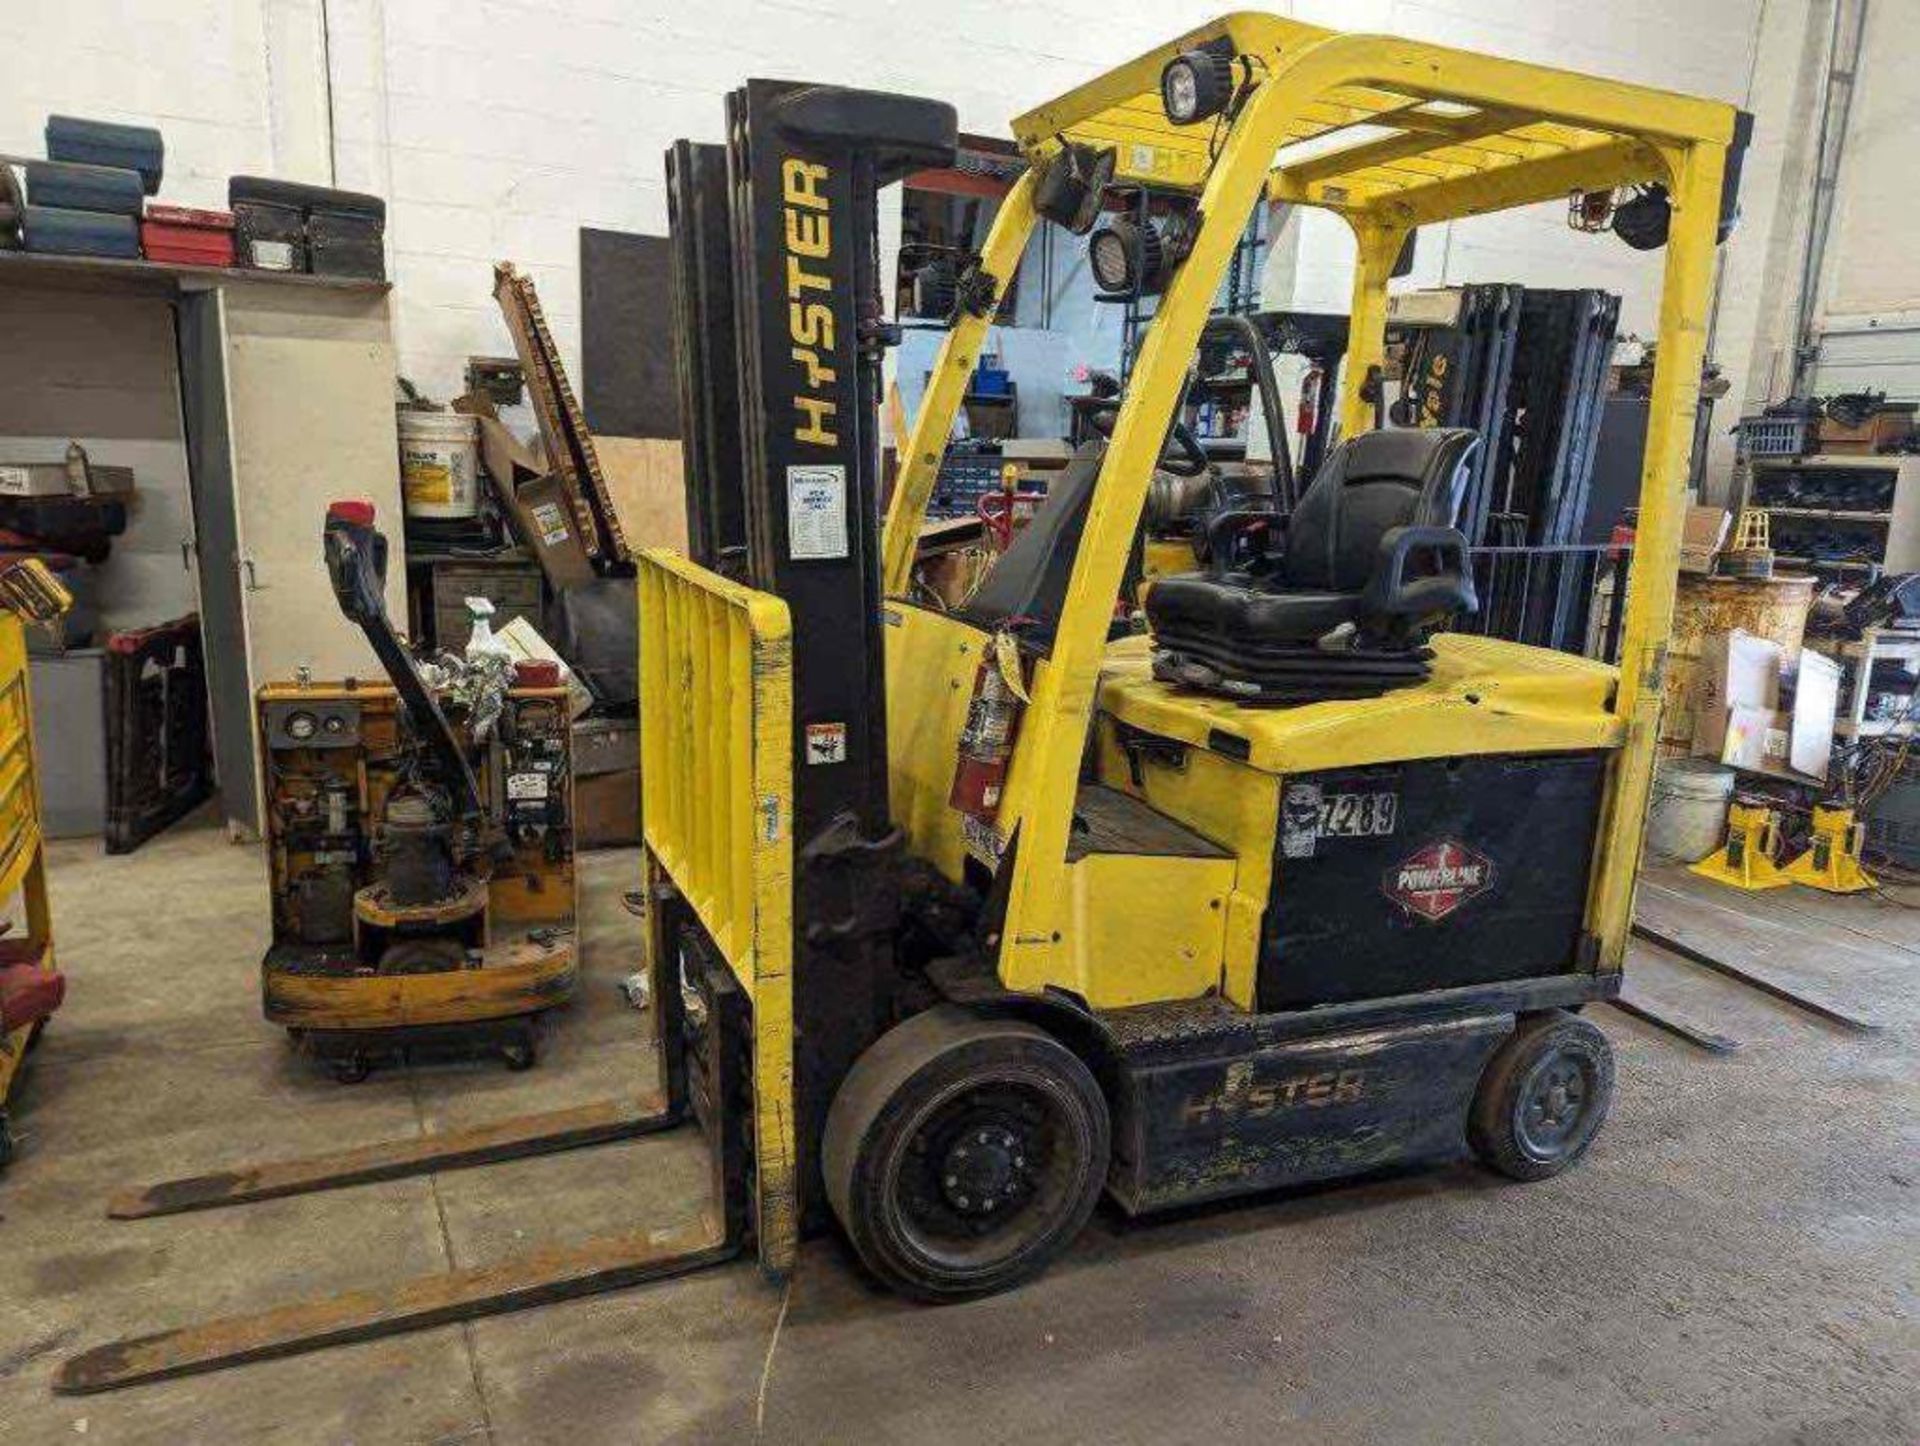 2012 Hyster E50-XN33 Triple Mast Electric Forklift (located off-site, please read description) - Image 15 of 15